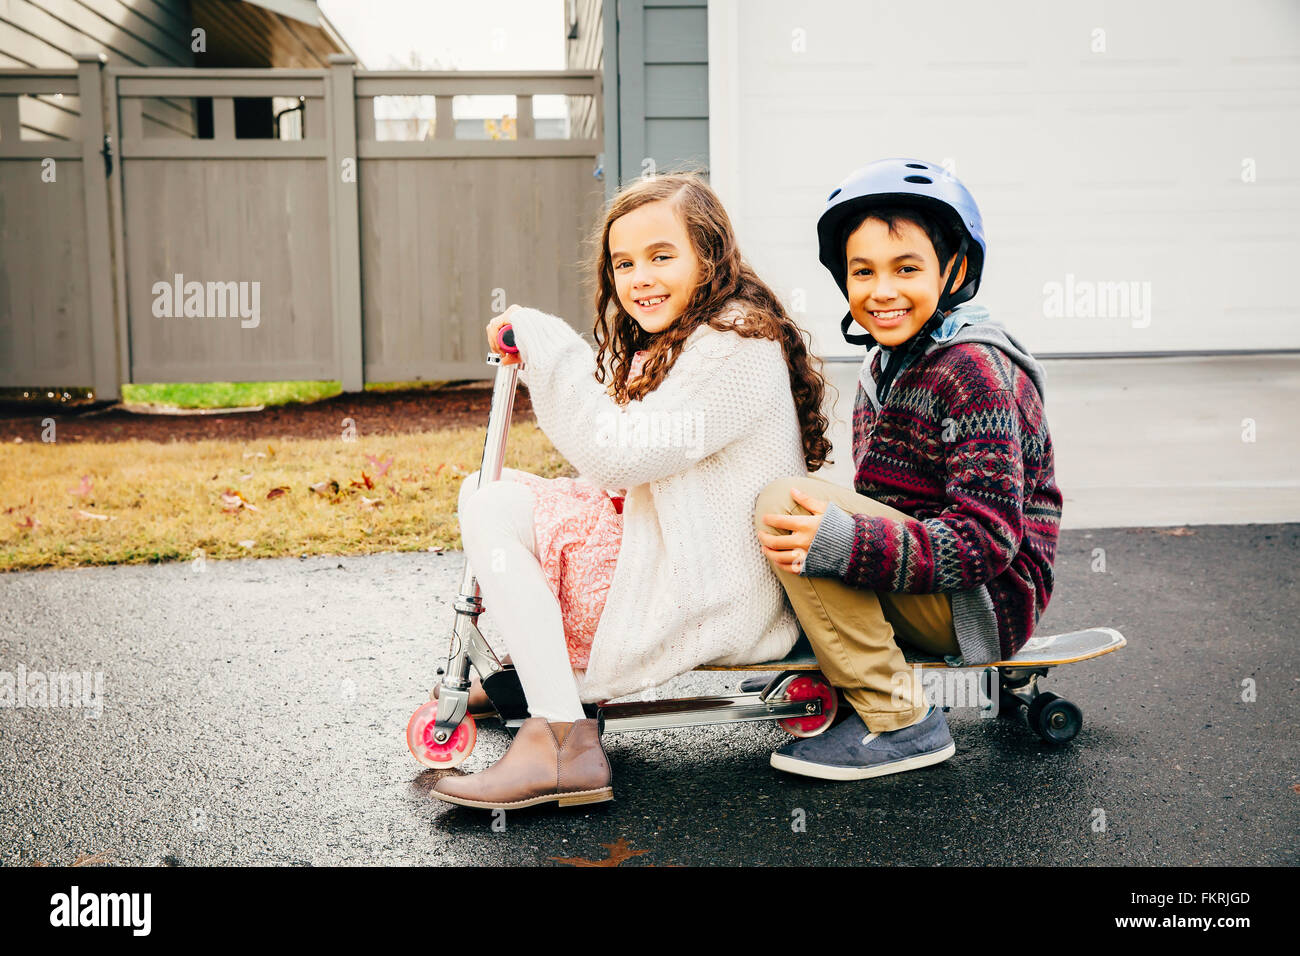 Mixed race children playing outdoors Stock Photo